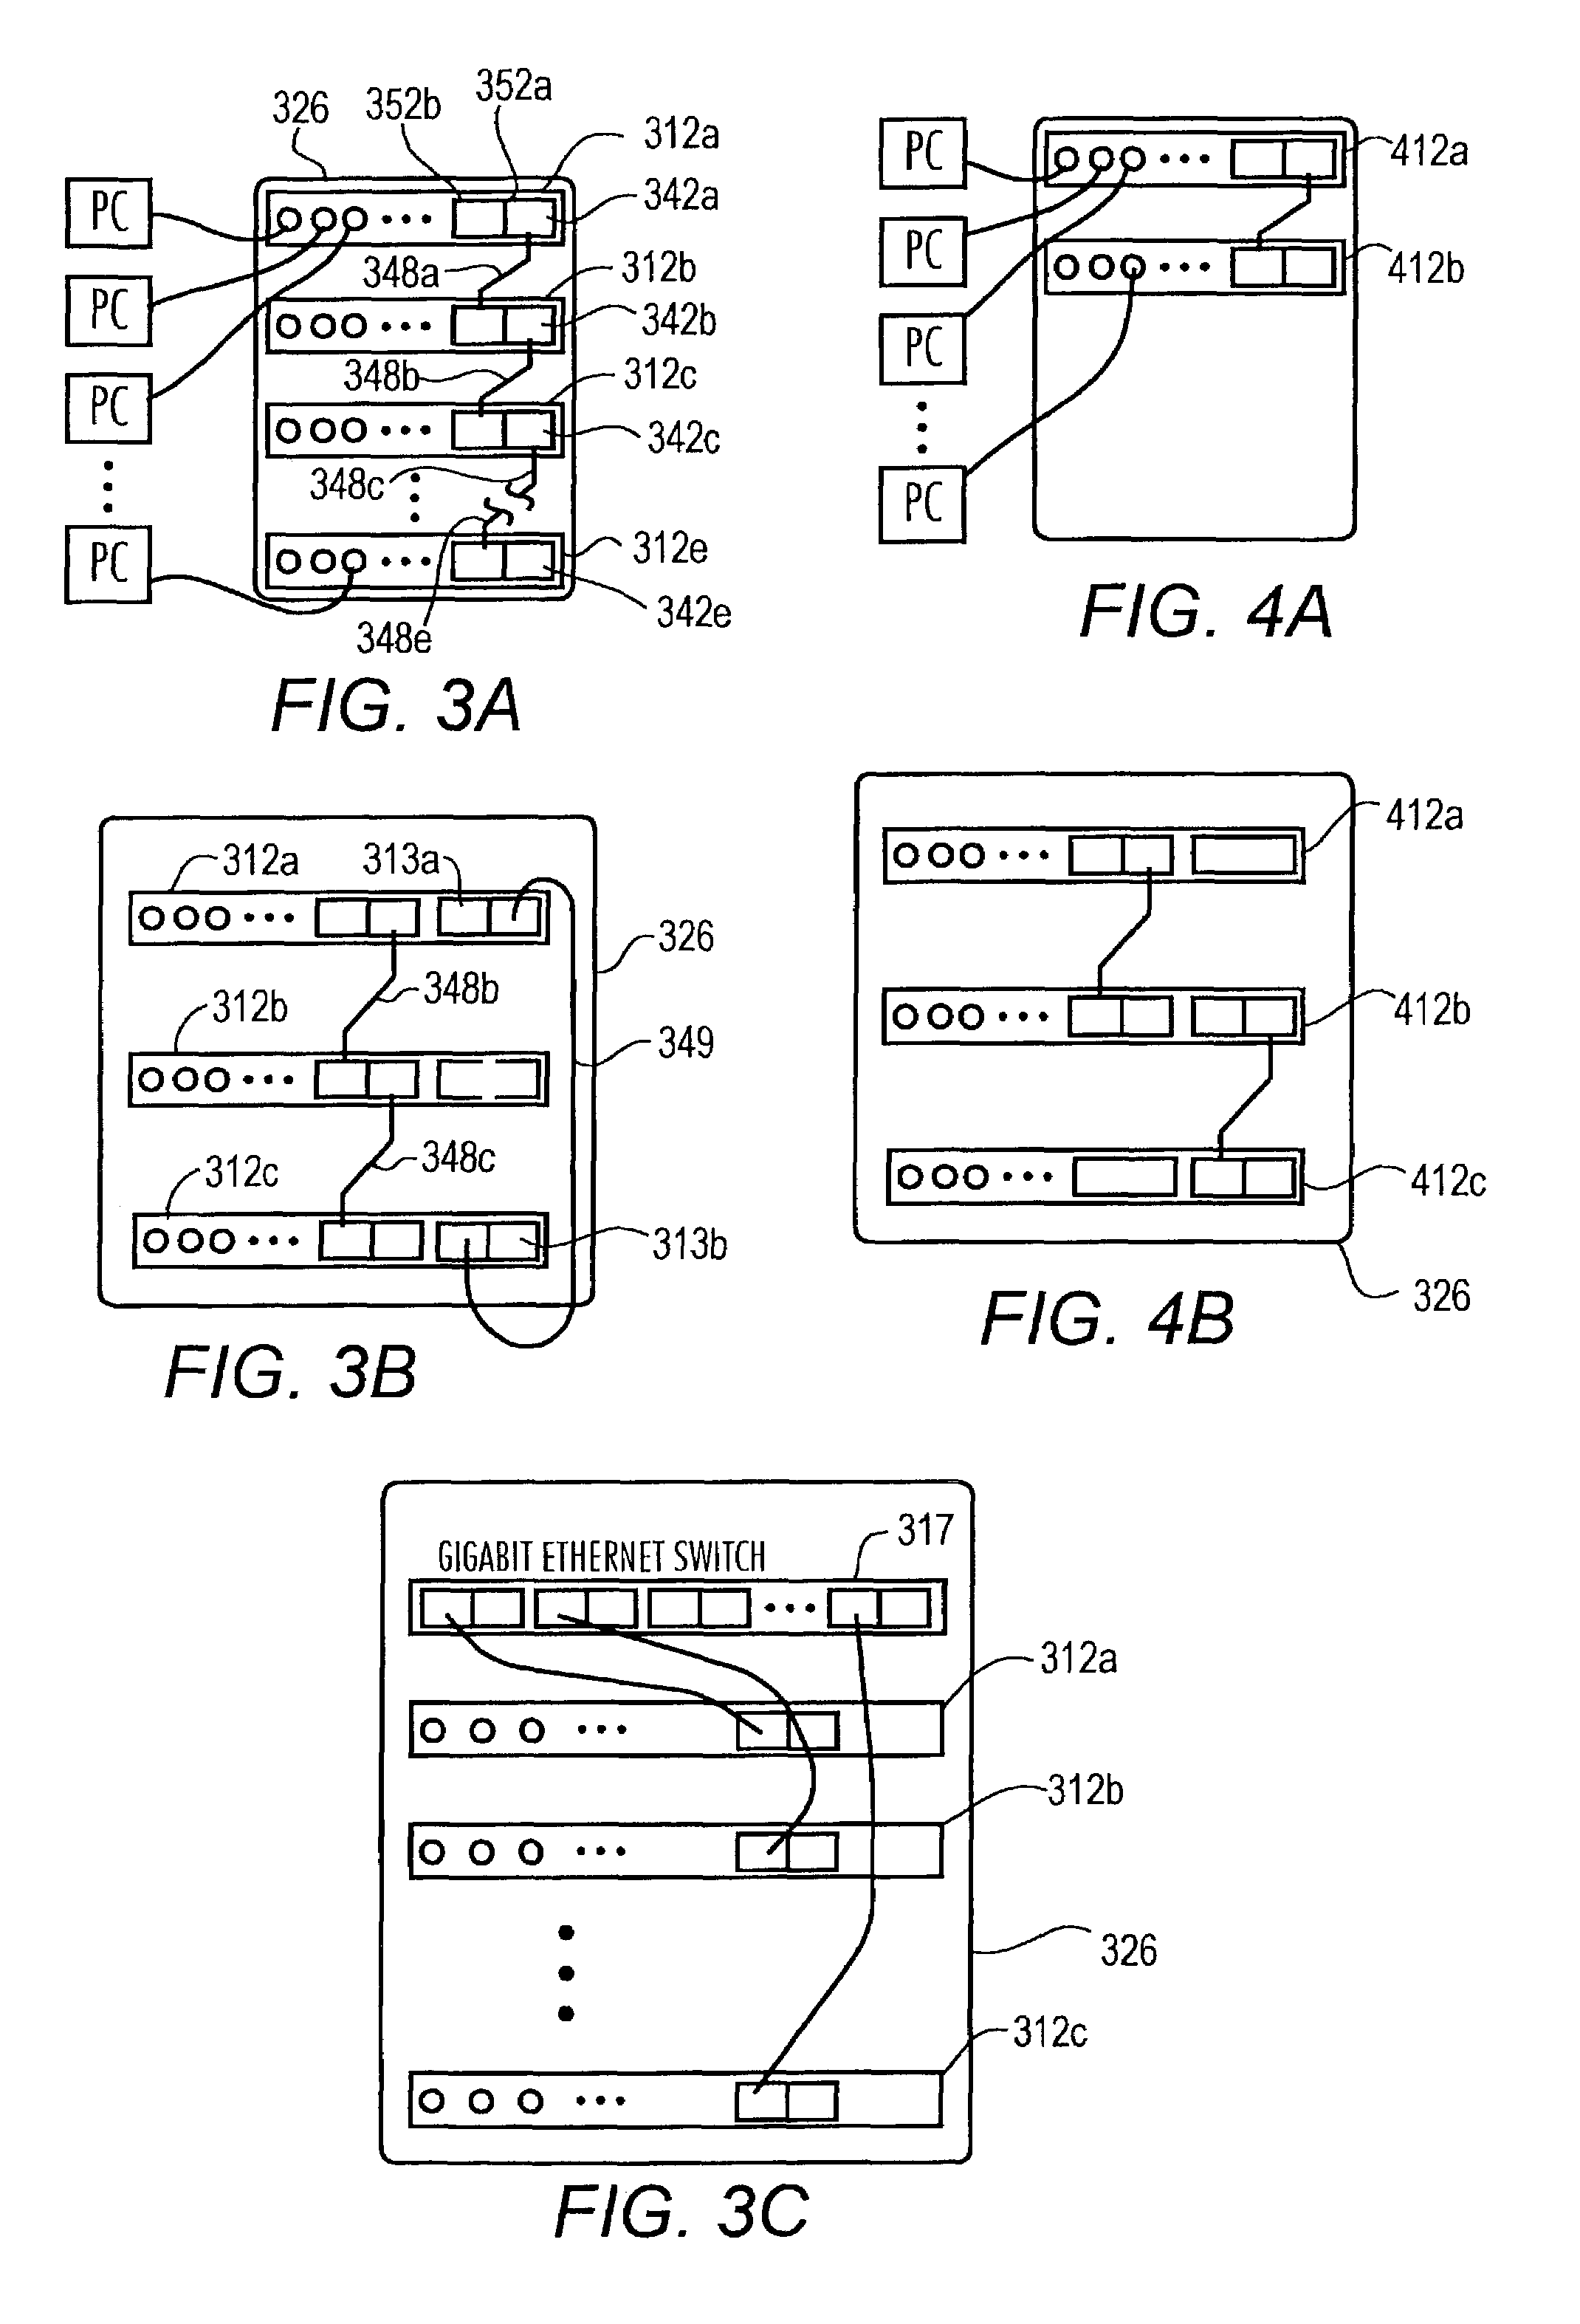 Module for distributed network repeater